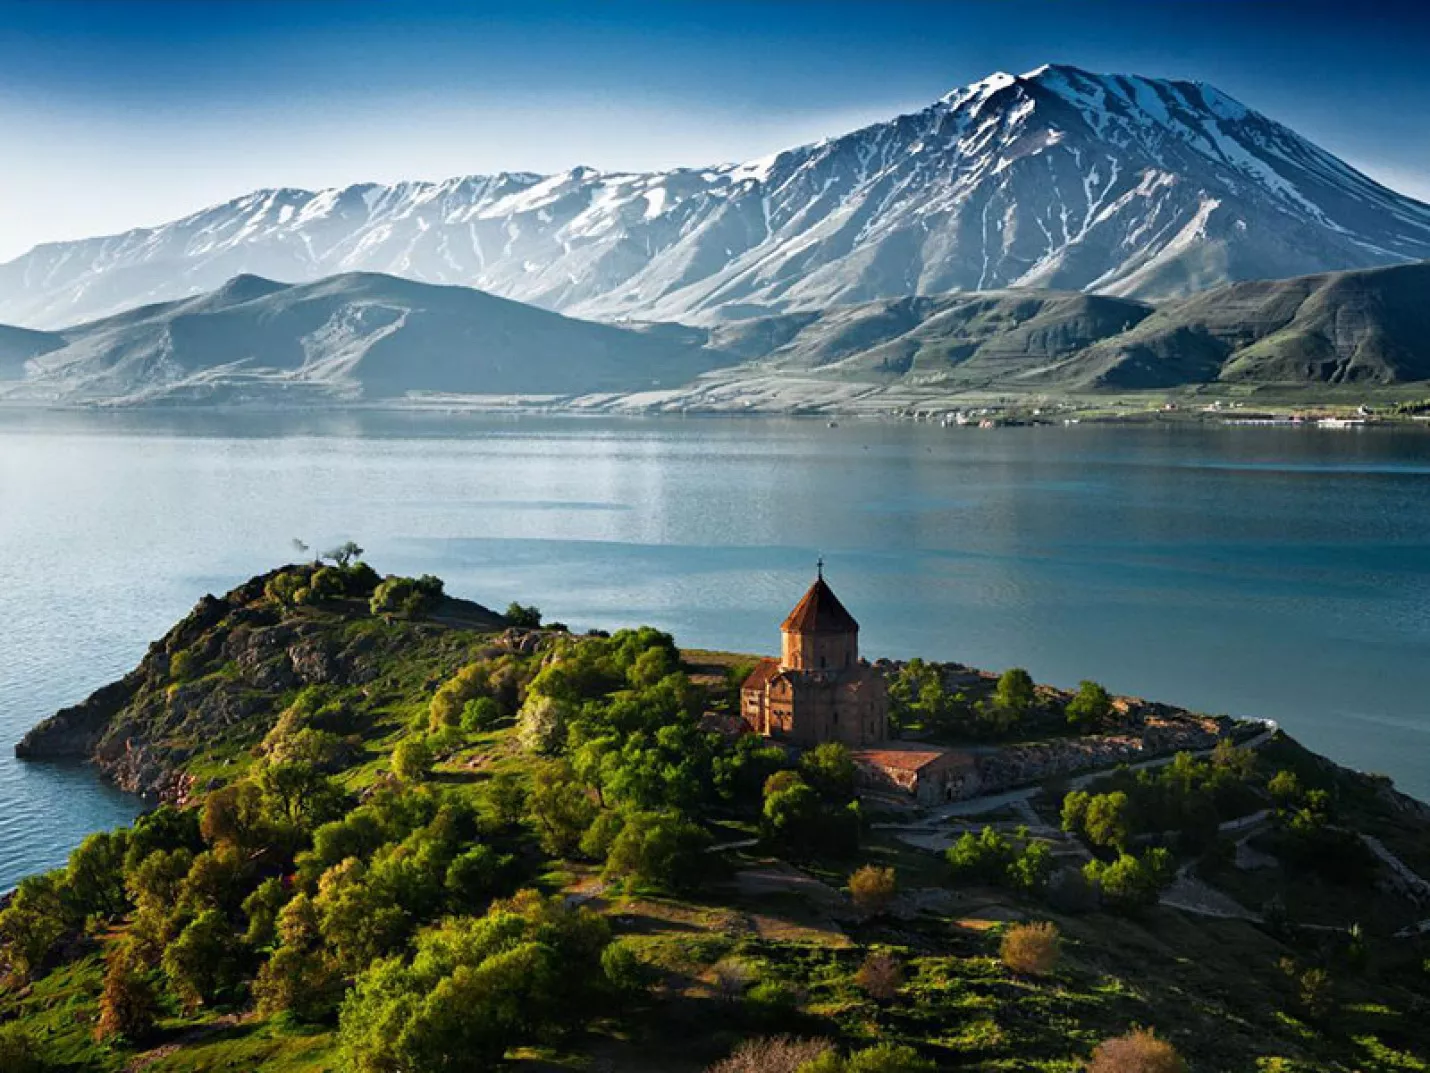 Sevan National Park in Armenia, Middle East | Parks - Rated 3.8